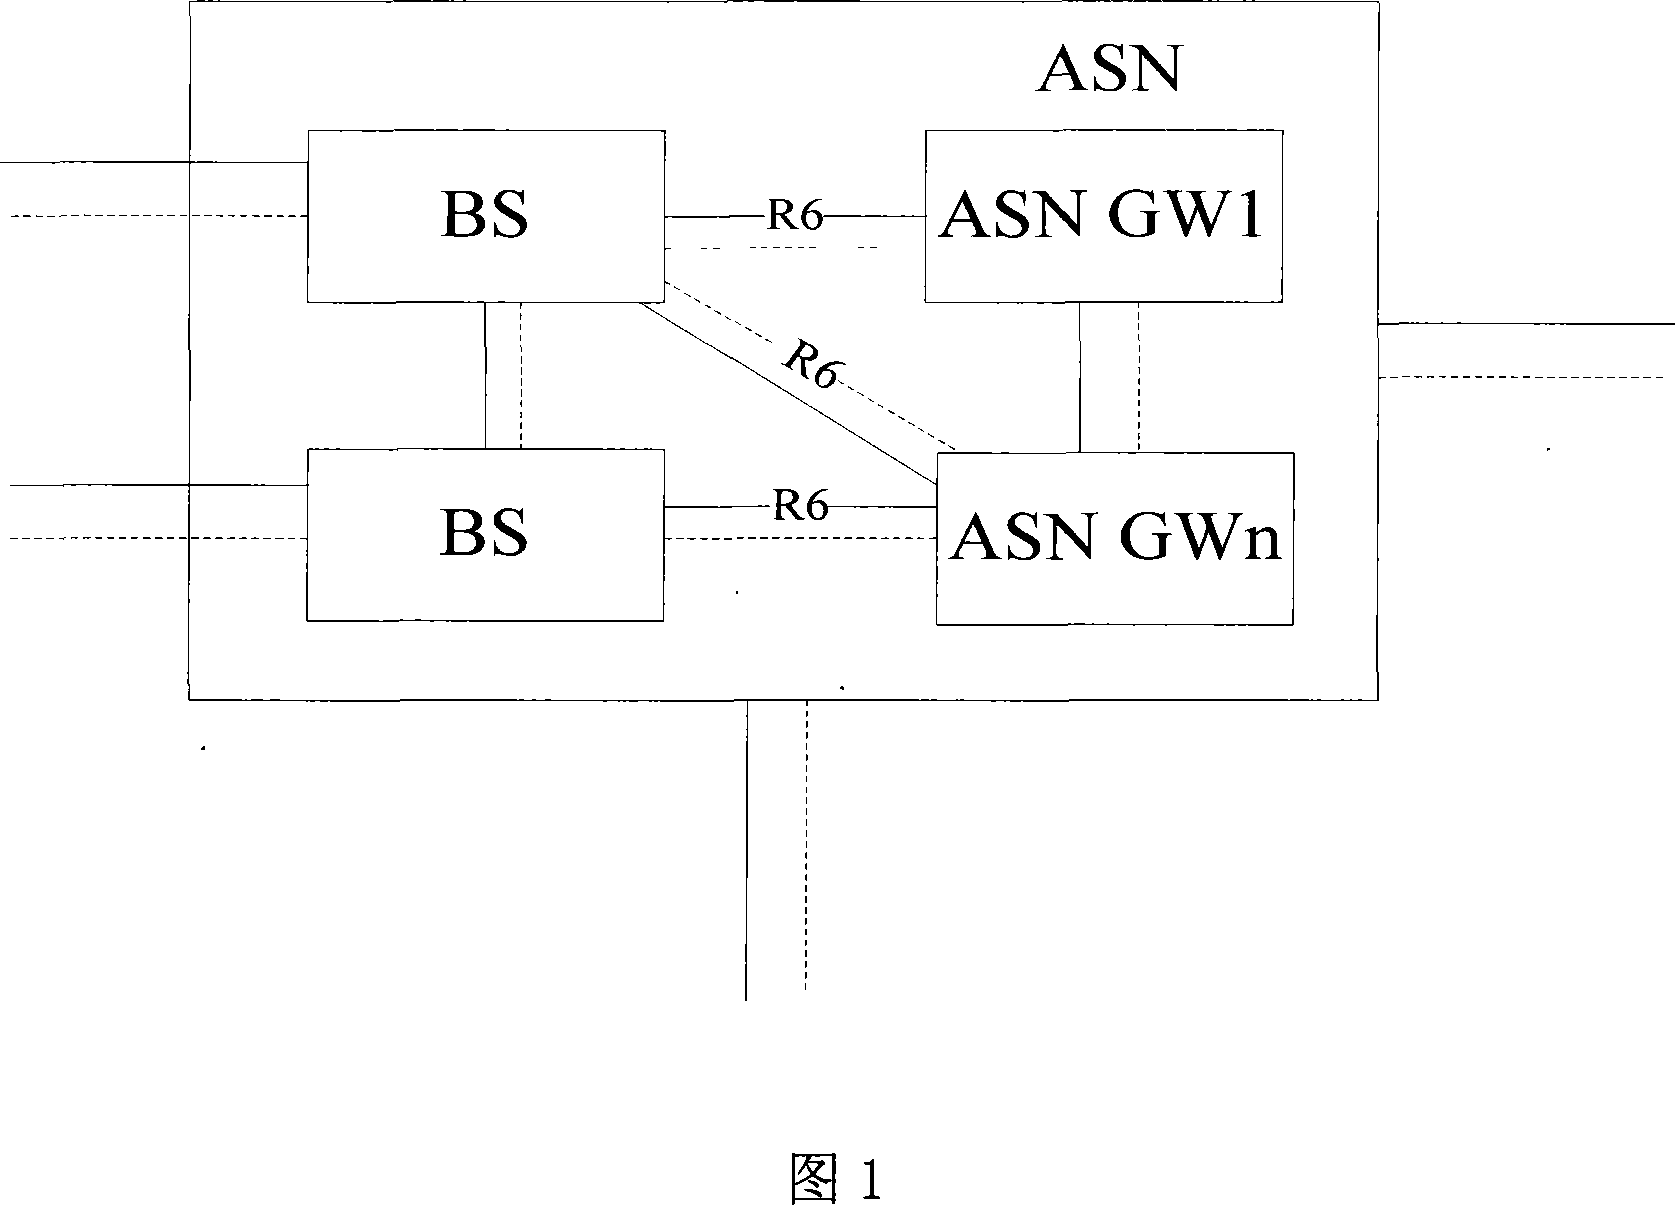 Method for selecting access network gateway in microwave access global intercommunication wireless communication system